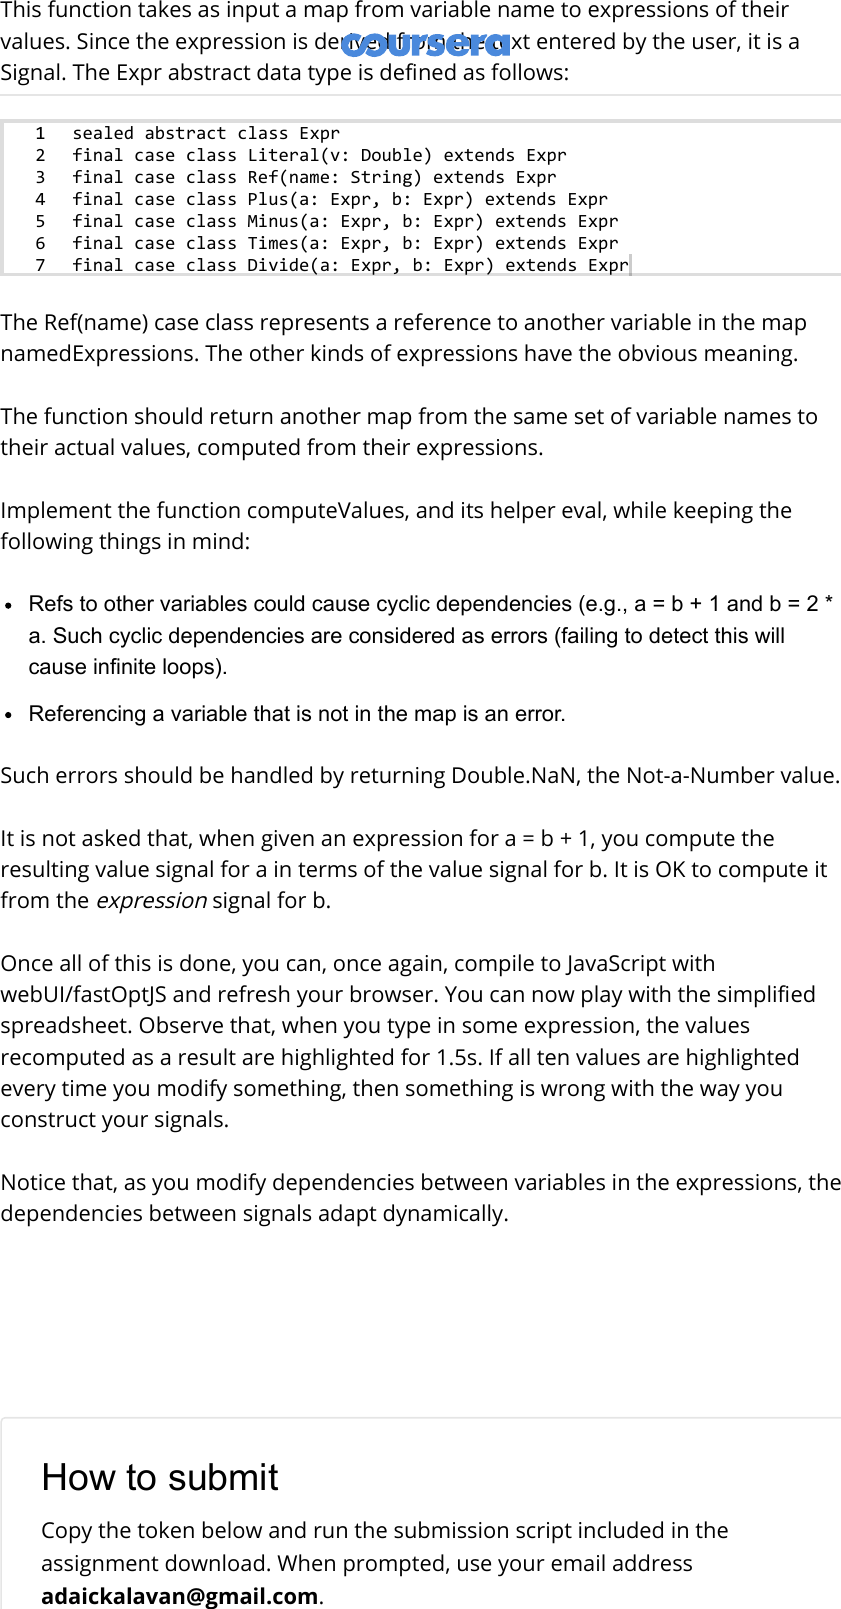 Page 4 of 5 - Instructions-Calculator